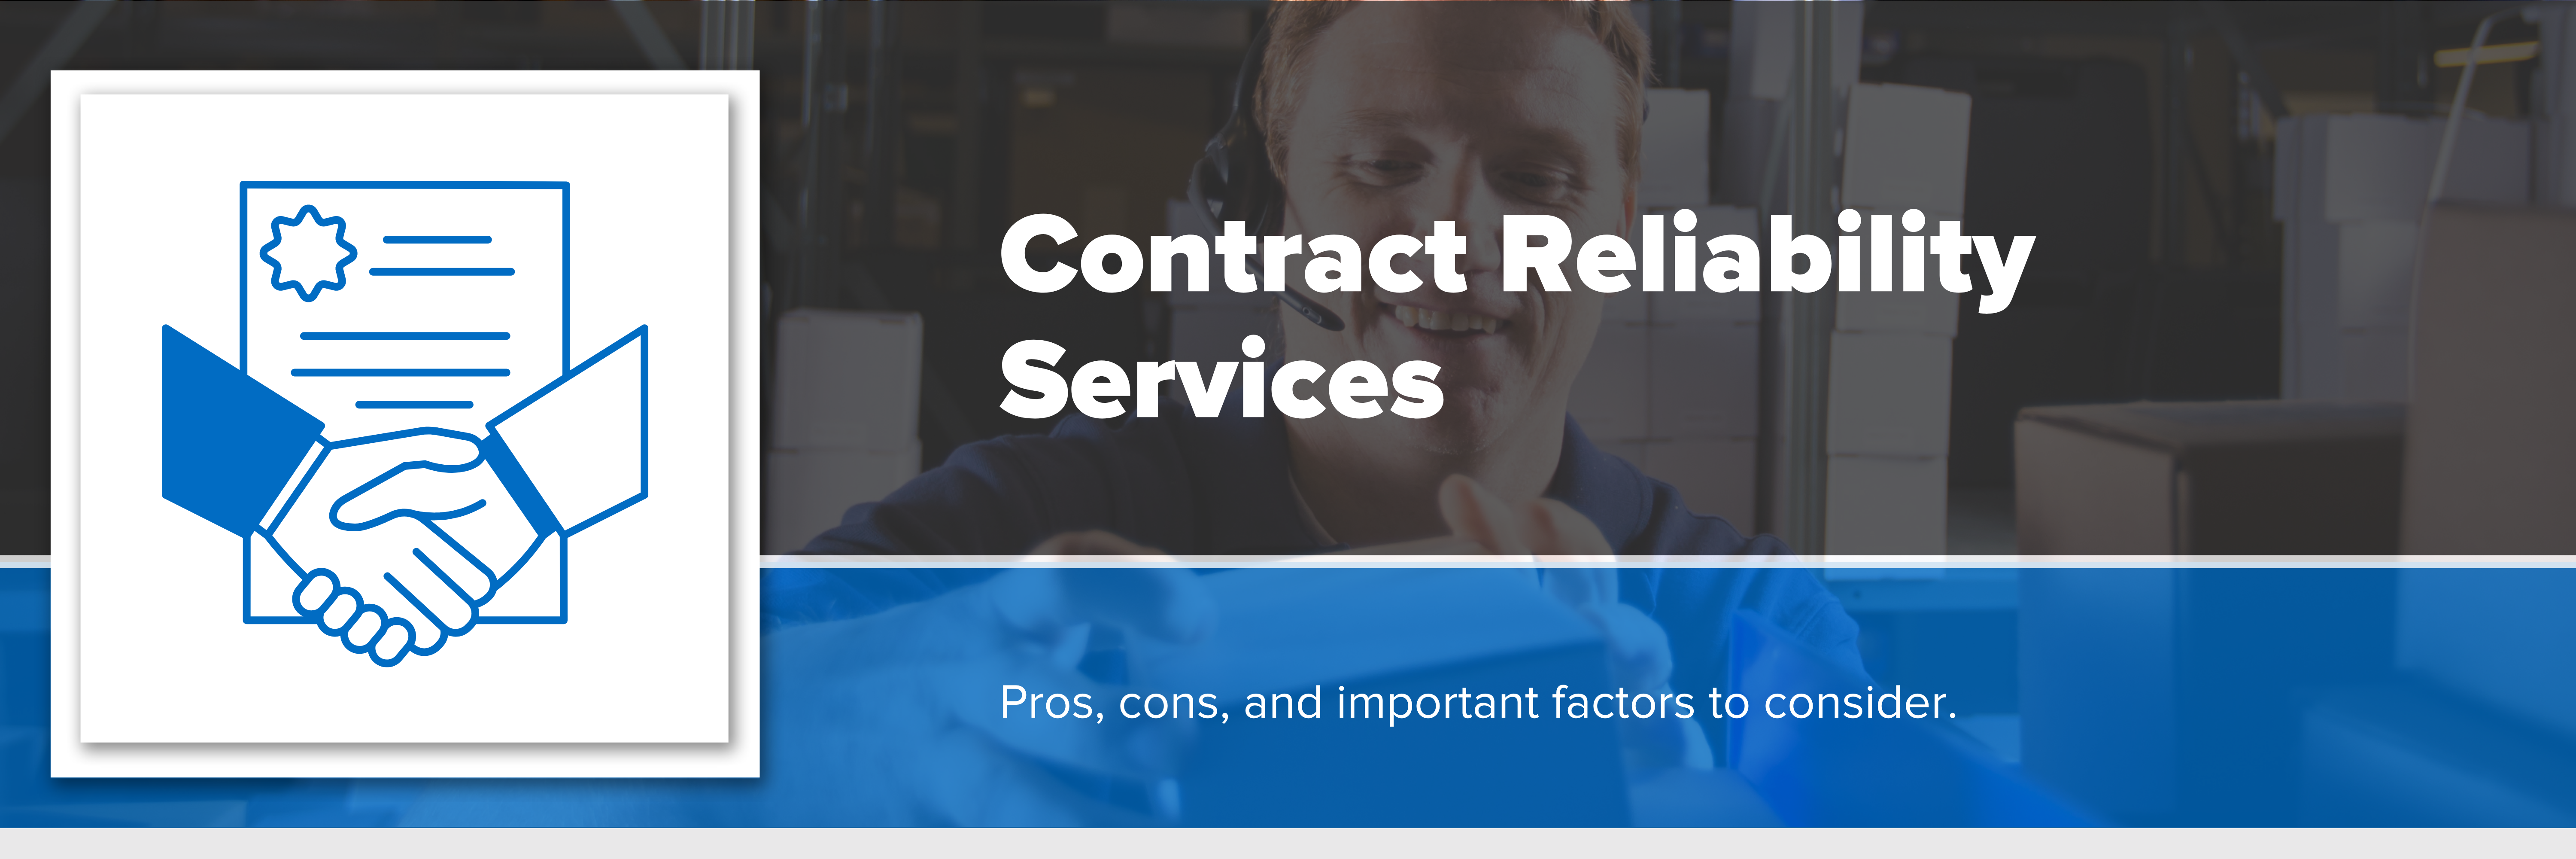 Header image with text "Contract Reliability Services"